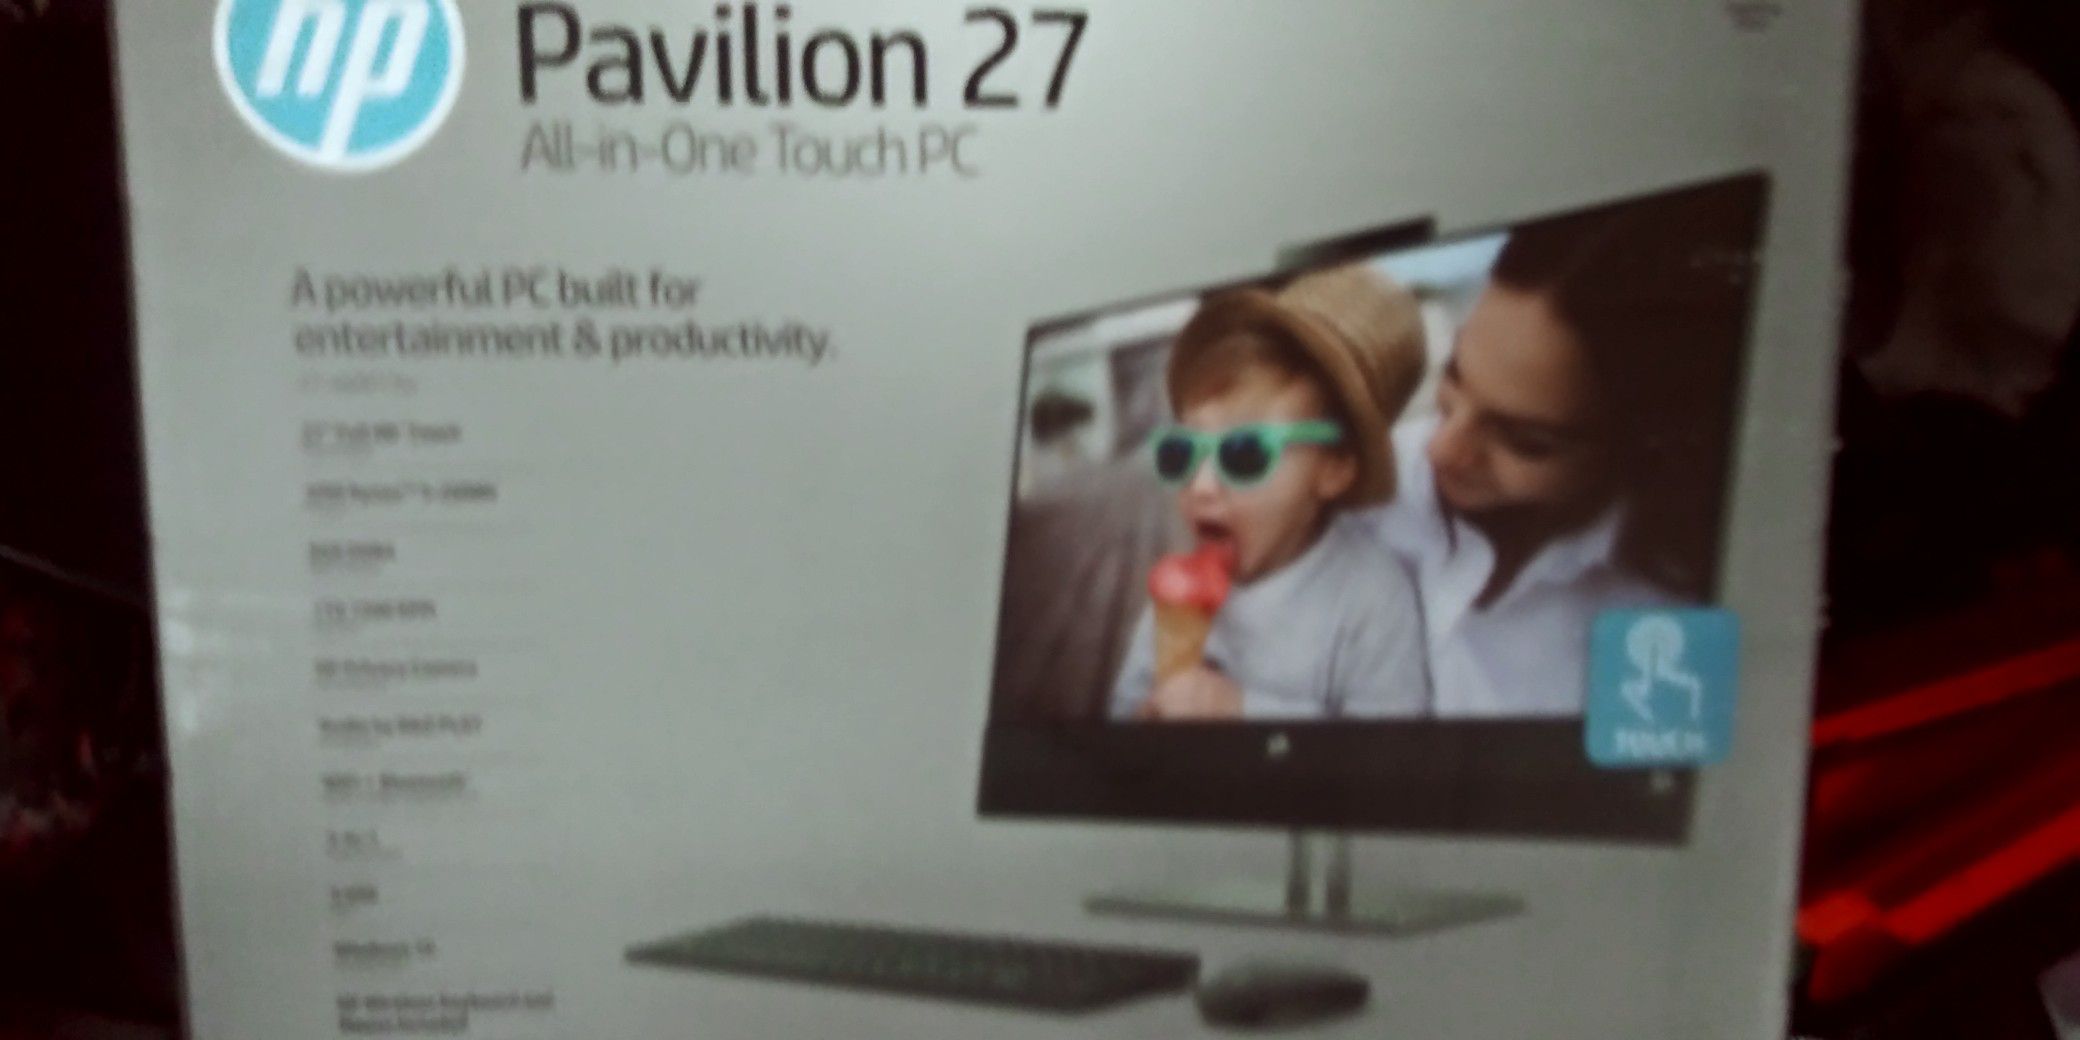 27" HP All-in-One Touch PC